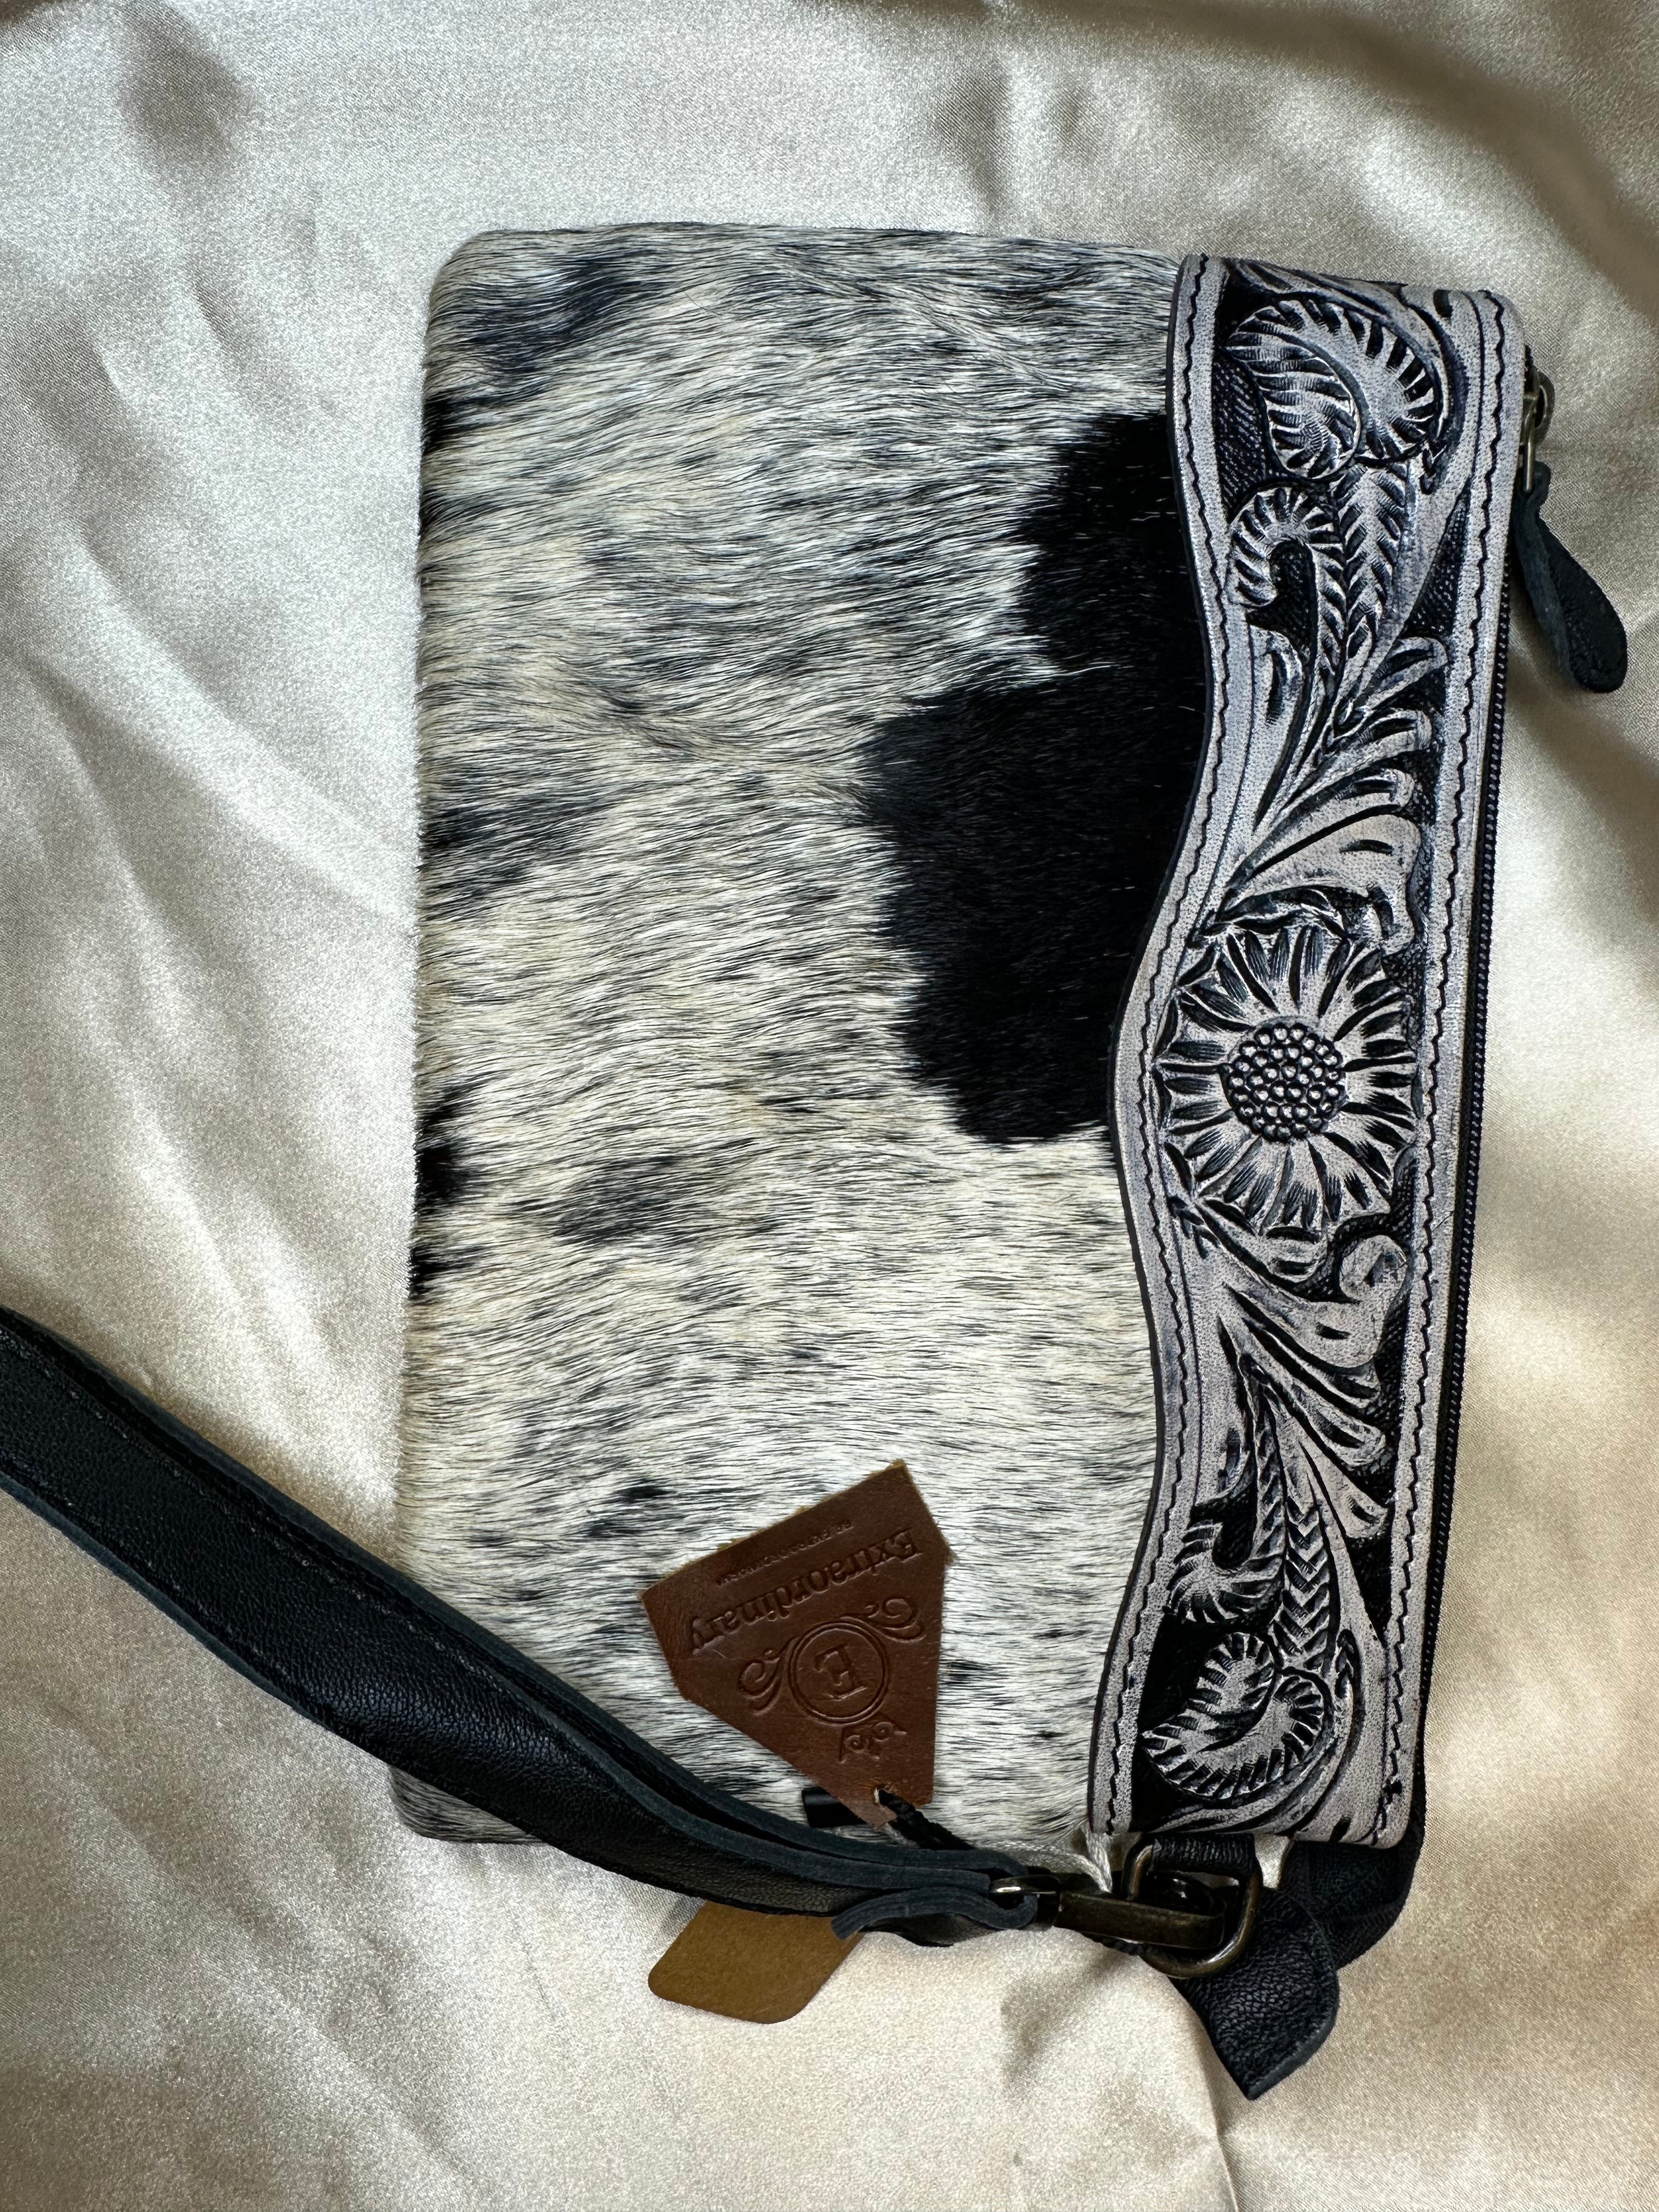 Hot Selling Tooled Leather Clutch Wristlet Hair On Leather Clutch Stylish Leather Wristlet